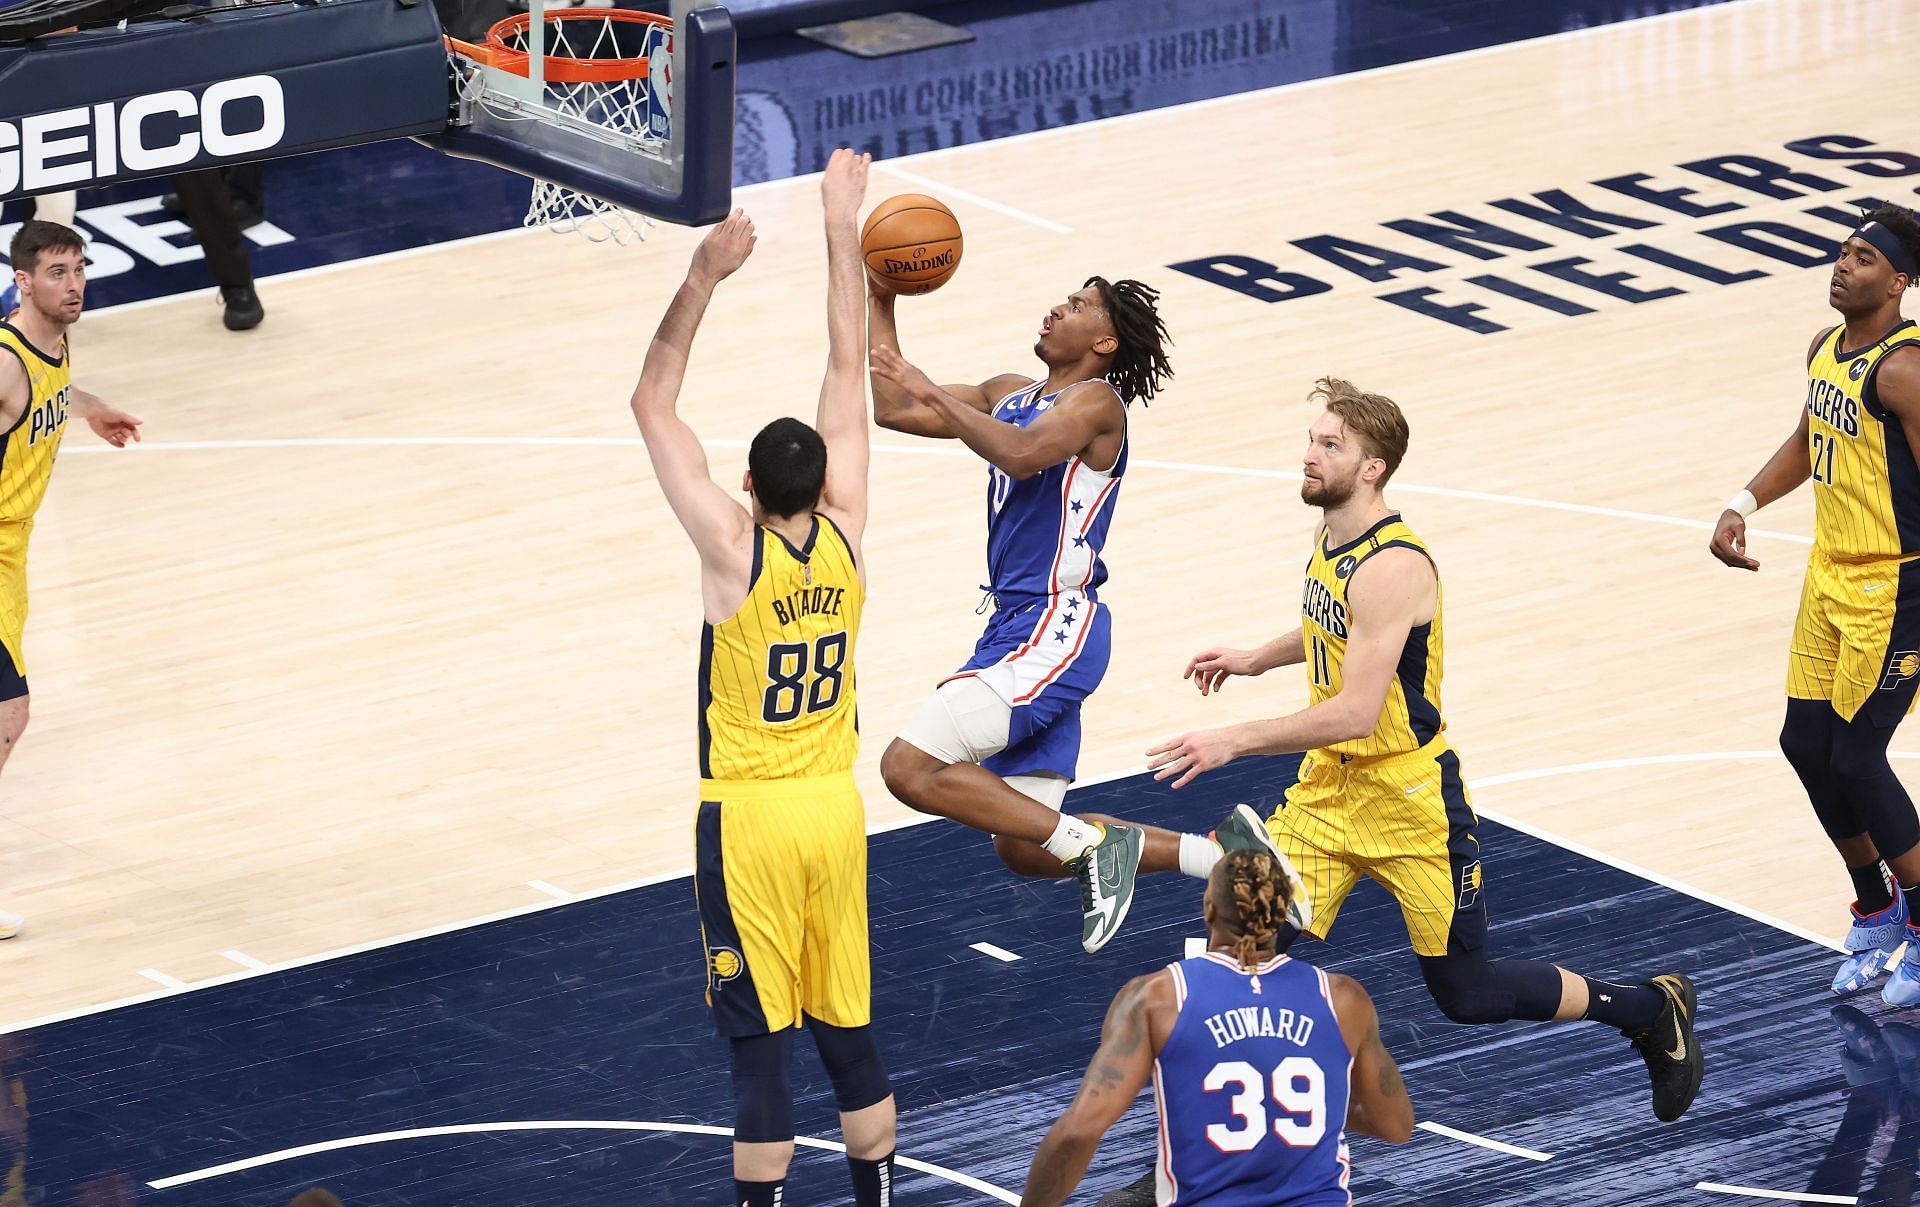 The Indiana Pacers will look to host the Philadelphia 76ers on November 13th